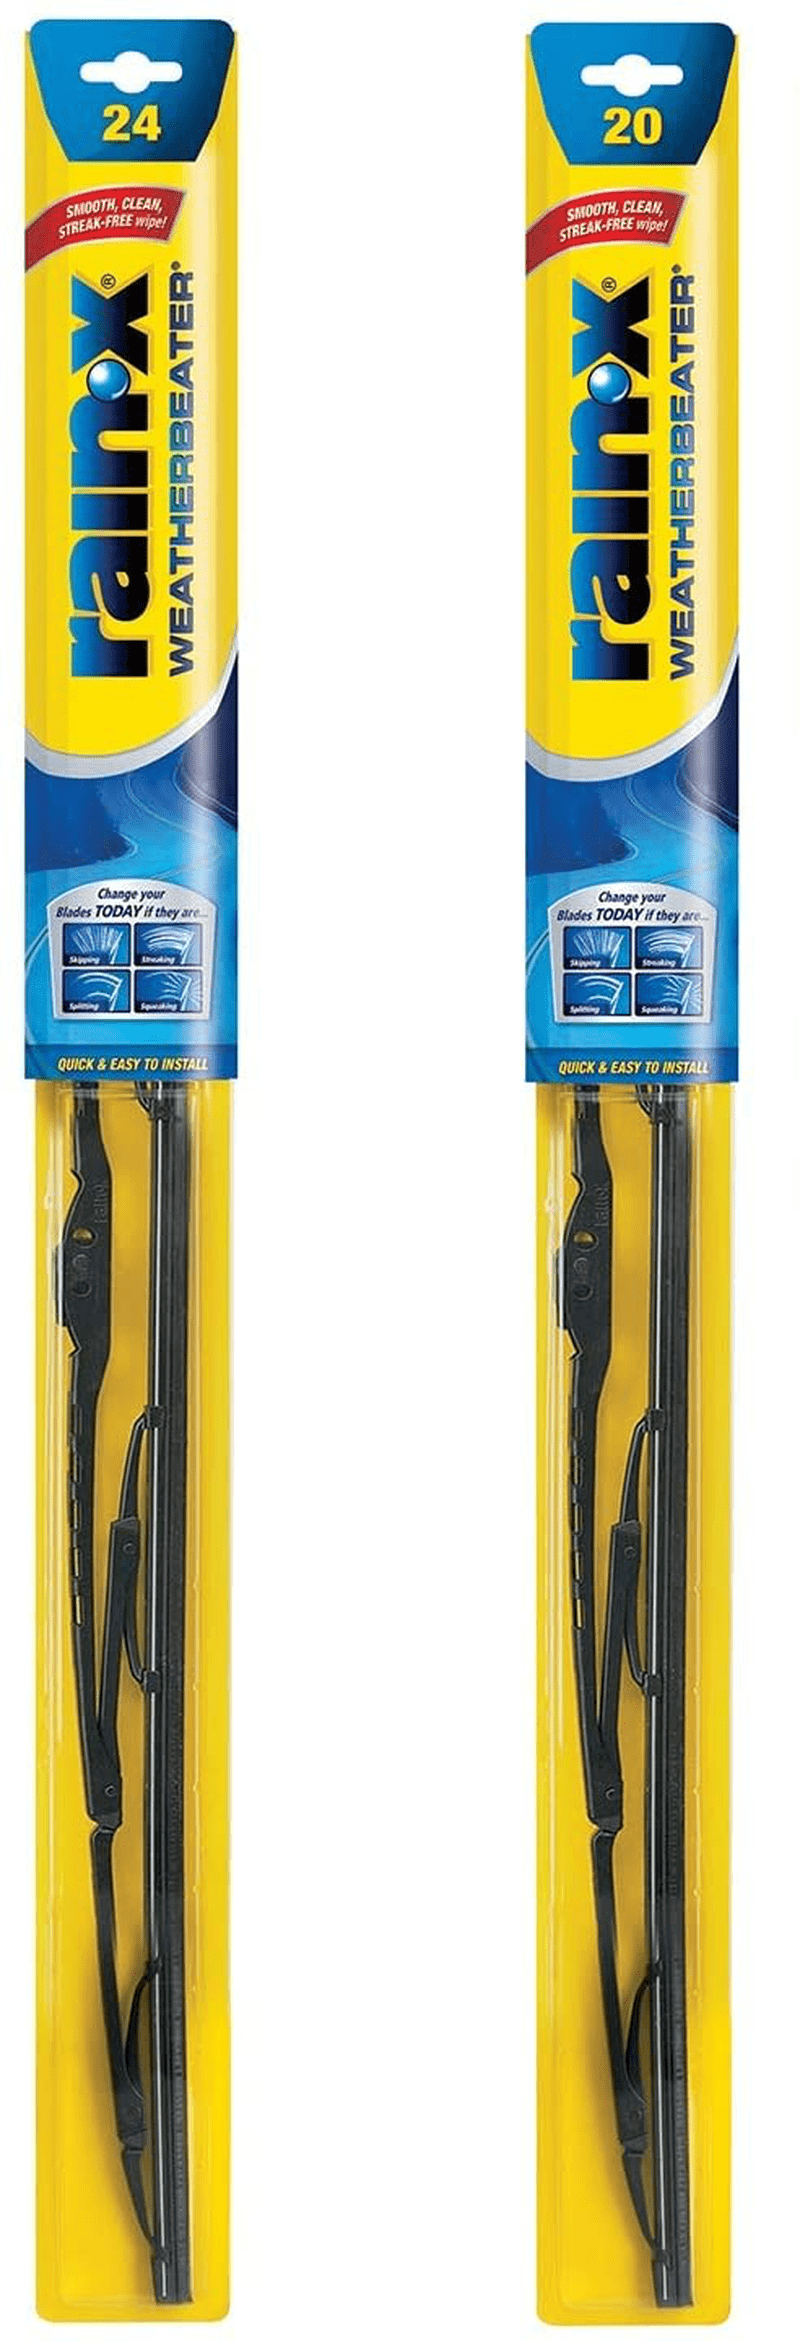 Rain-X RX30218 Weatherbeater Wiper Blade - 18-Inches - (Pack of 1) Vehicles & Parts > Vehicle Parts & Accessories > Motor Vehicle Parts Rain-X 2-pack 24 / 20 in combo 